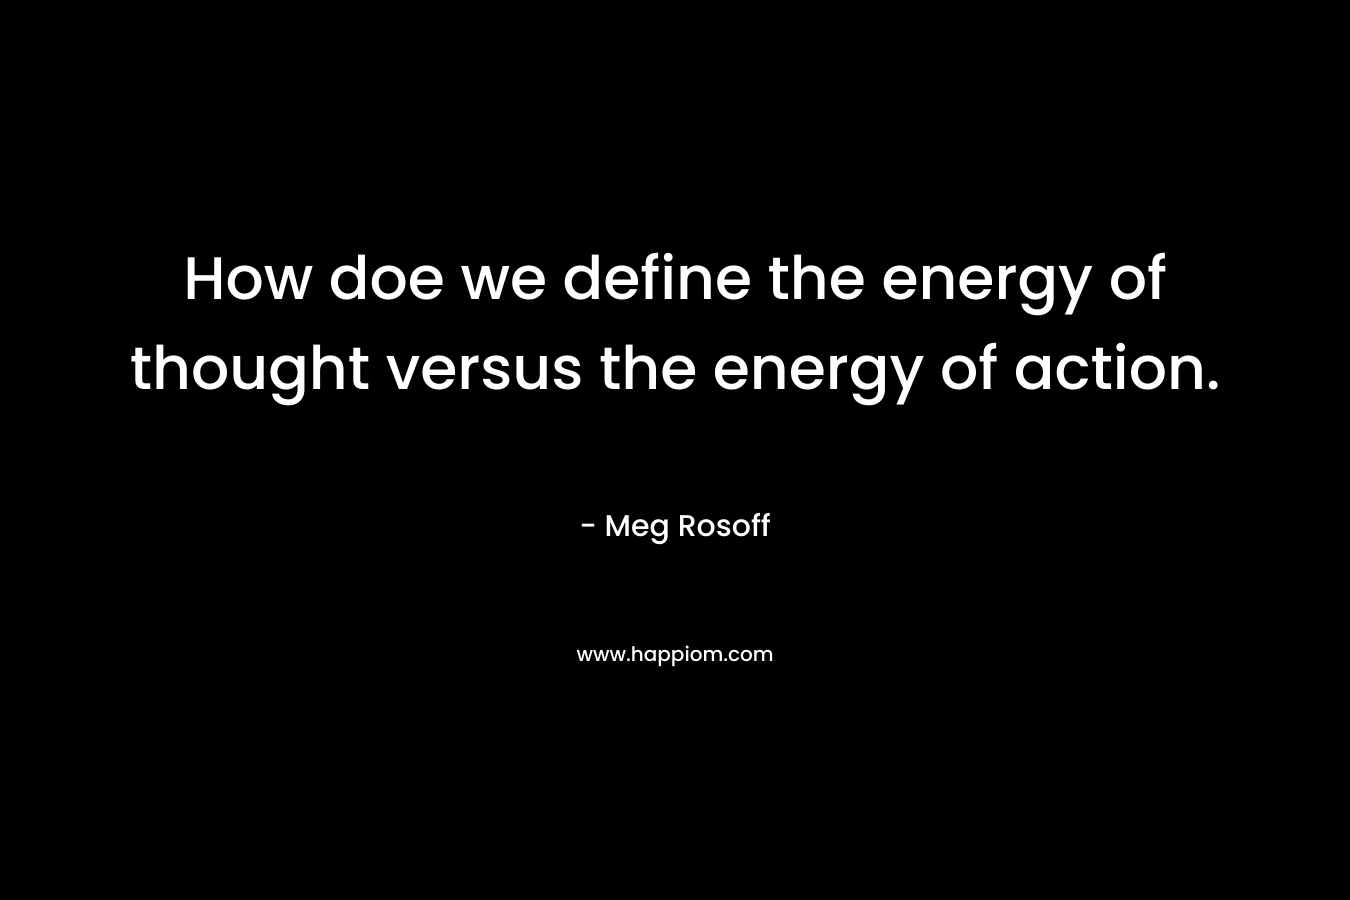 How doe we define the energy of thought versus the energy of action.